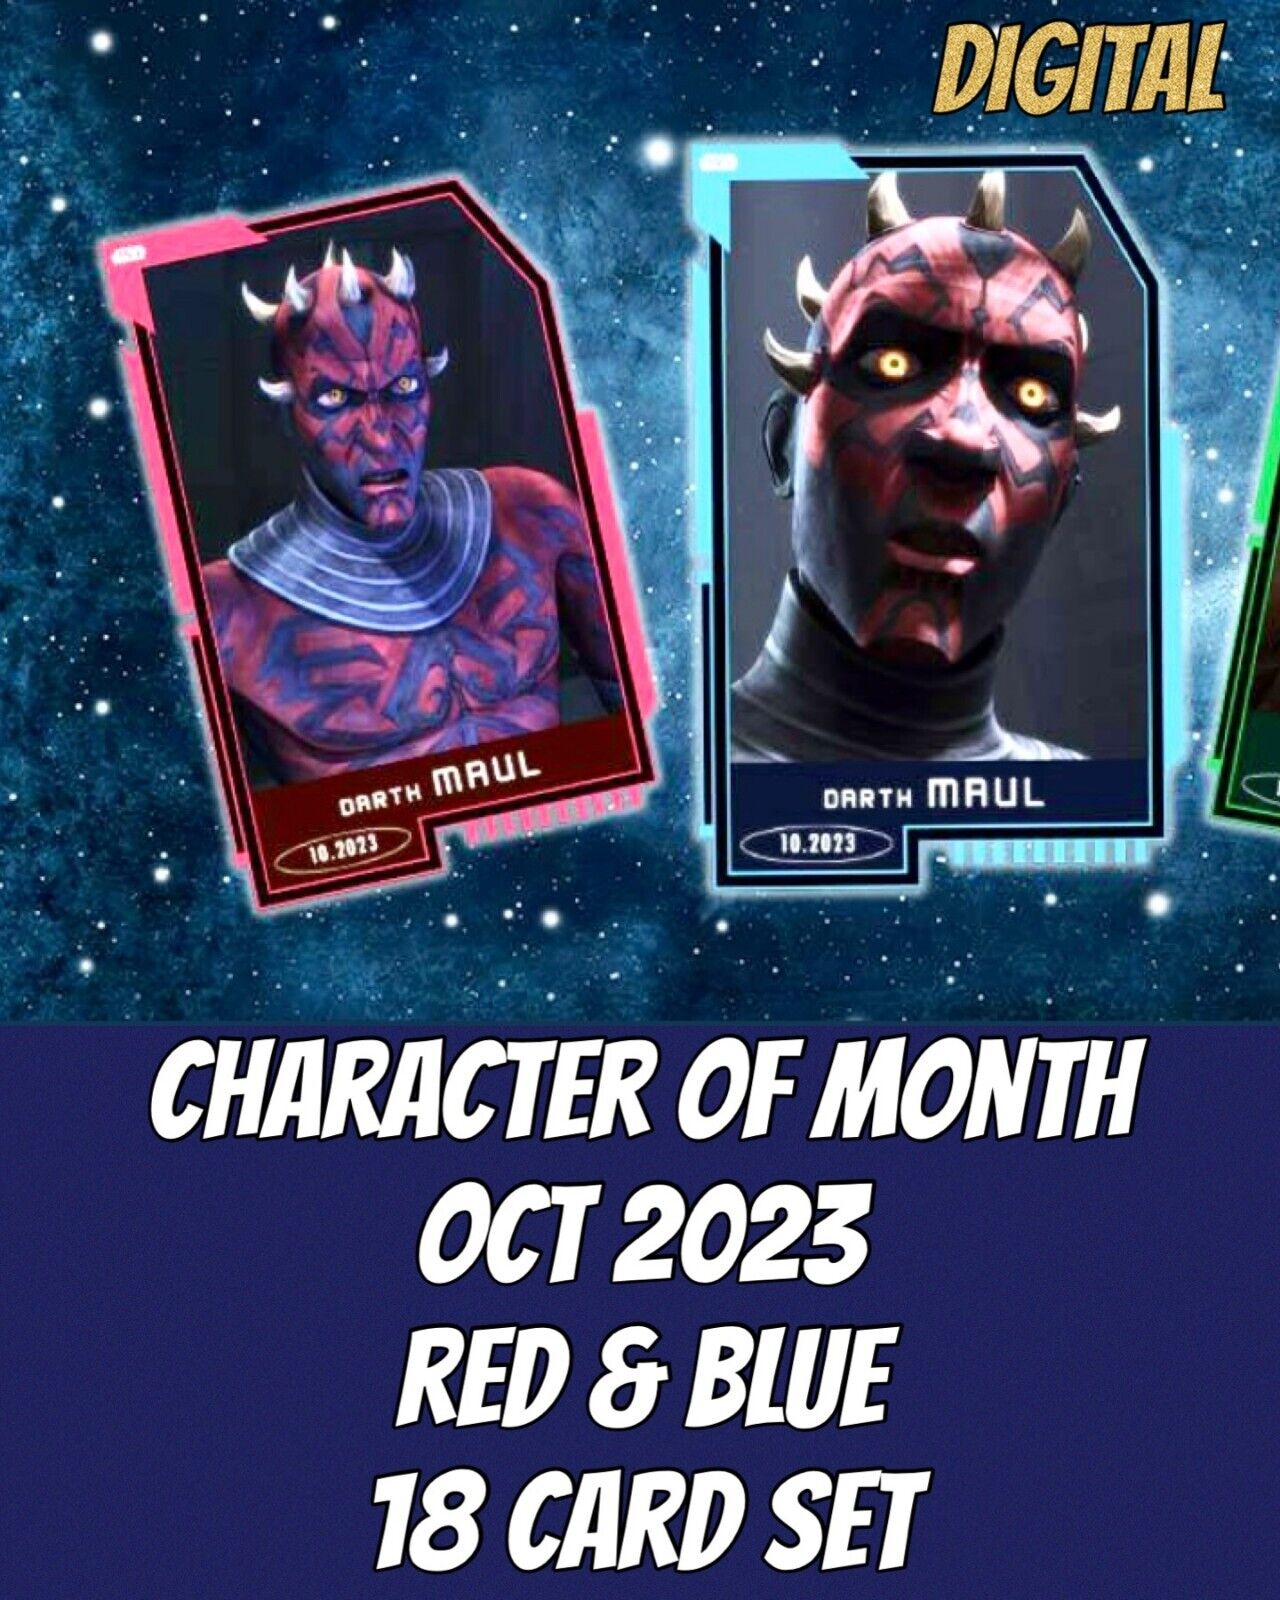 Topps Star Wars Card Trader COTM Character Month DARTH MAUL Red/UC 18 Card Set